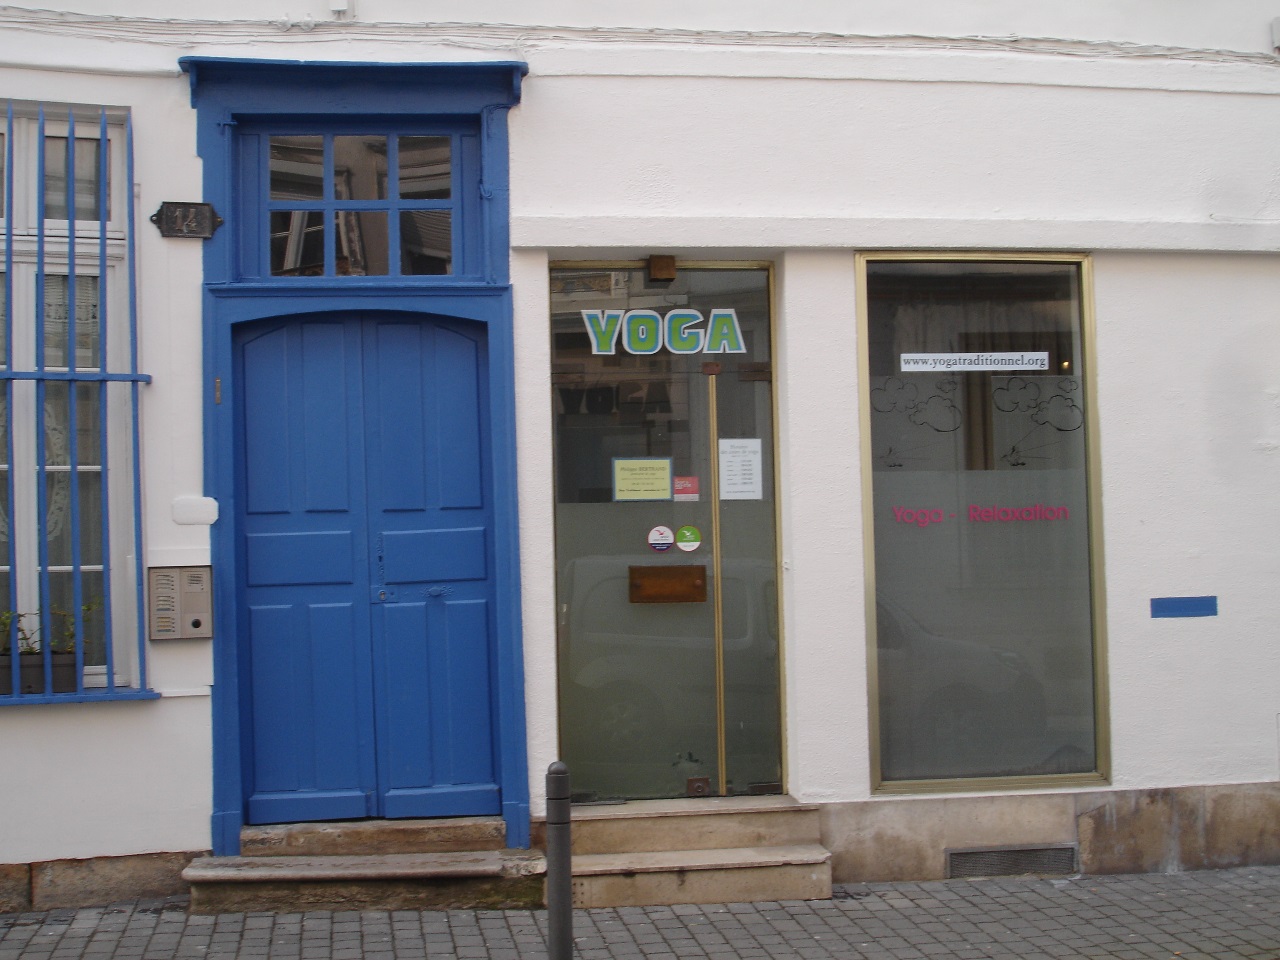 Yoga Traditionnel Troyes